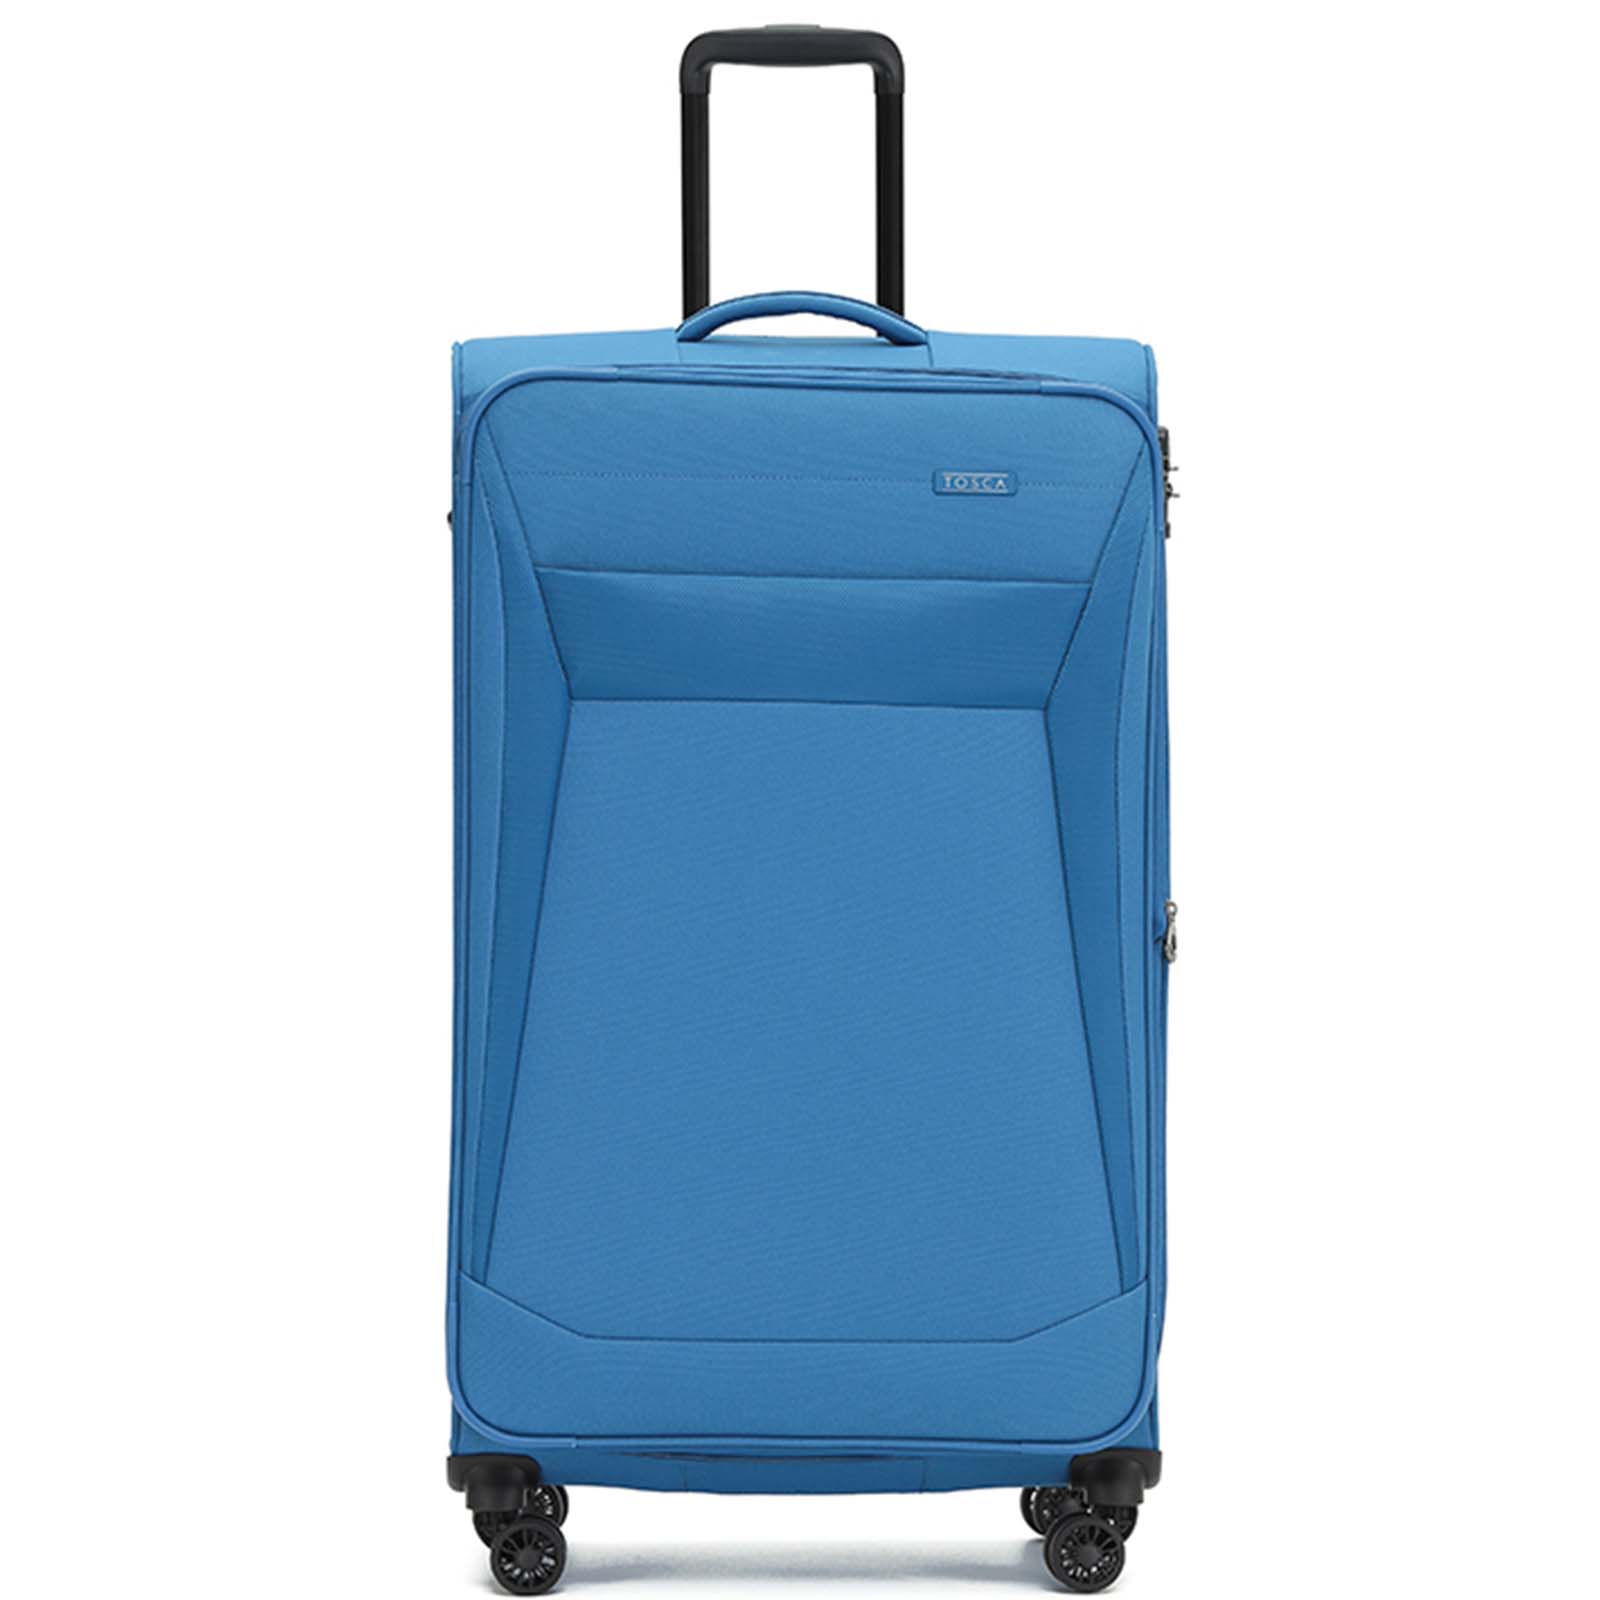 Tosca-Aviator-4-Wheel-Large-Suitcase-Blue-Front